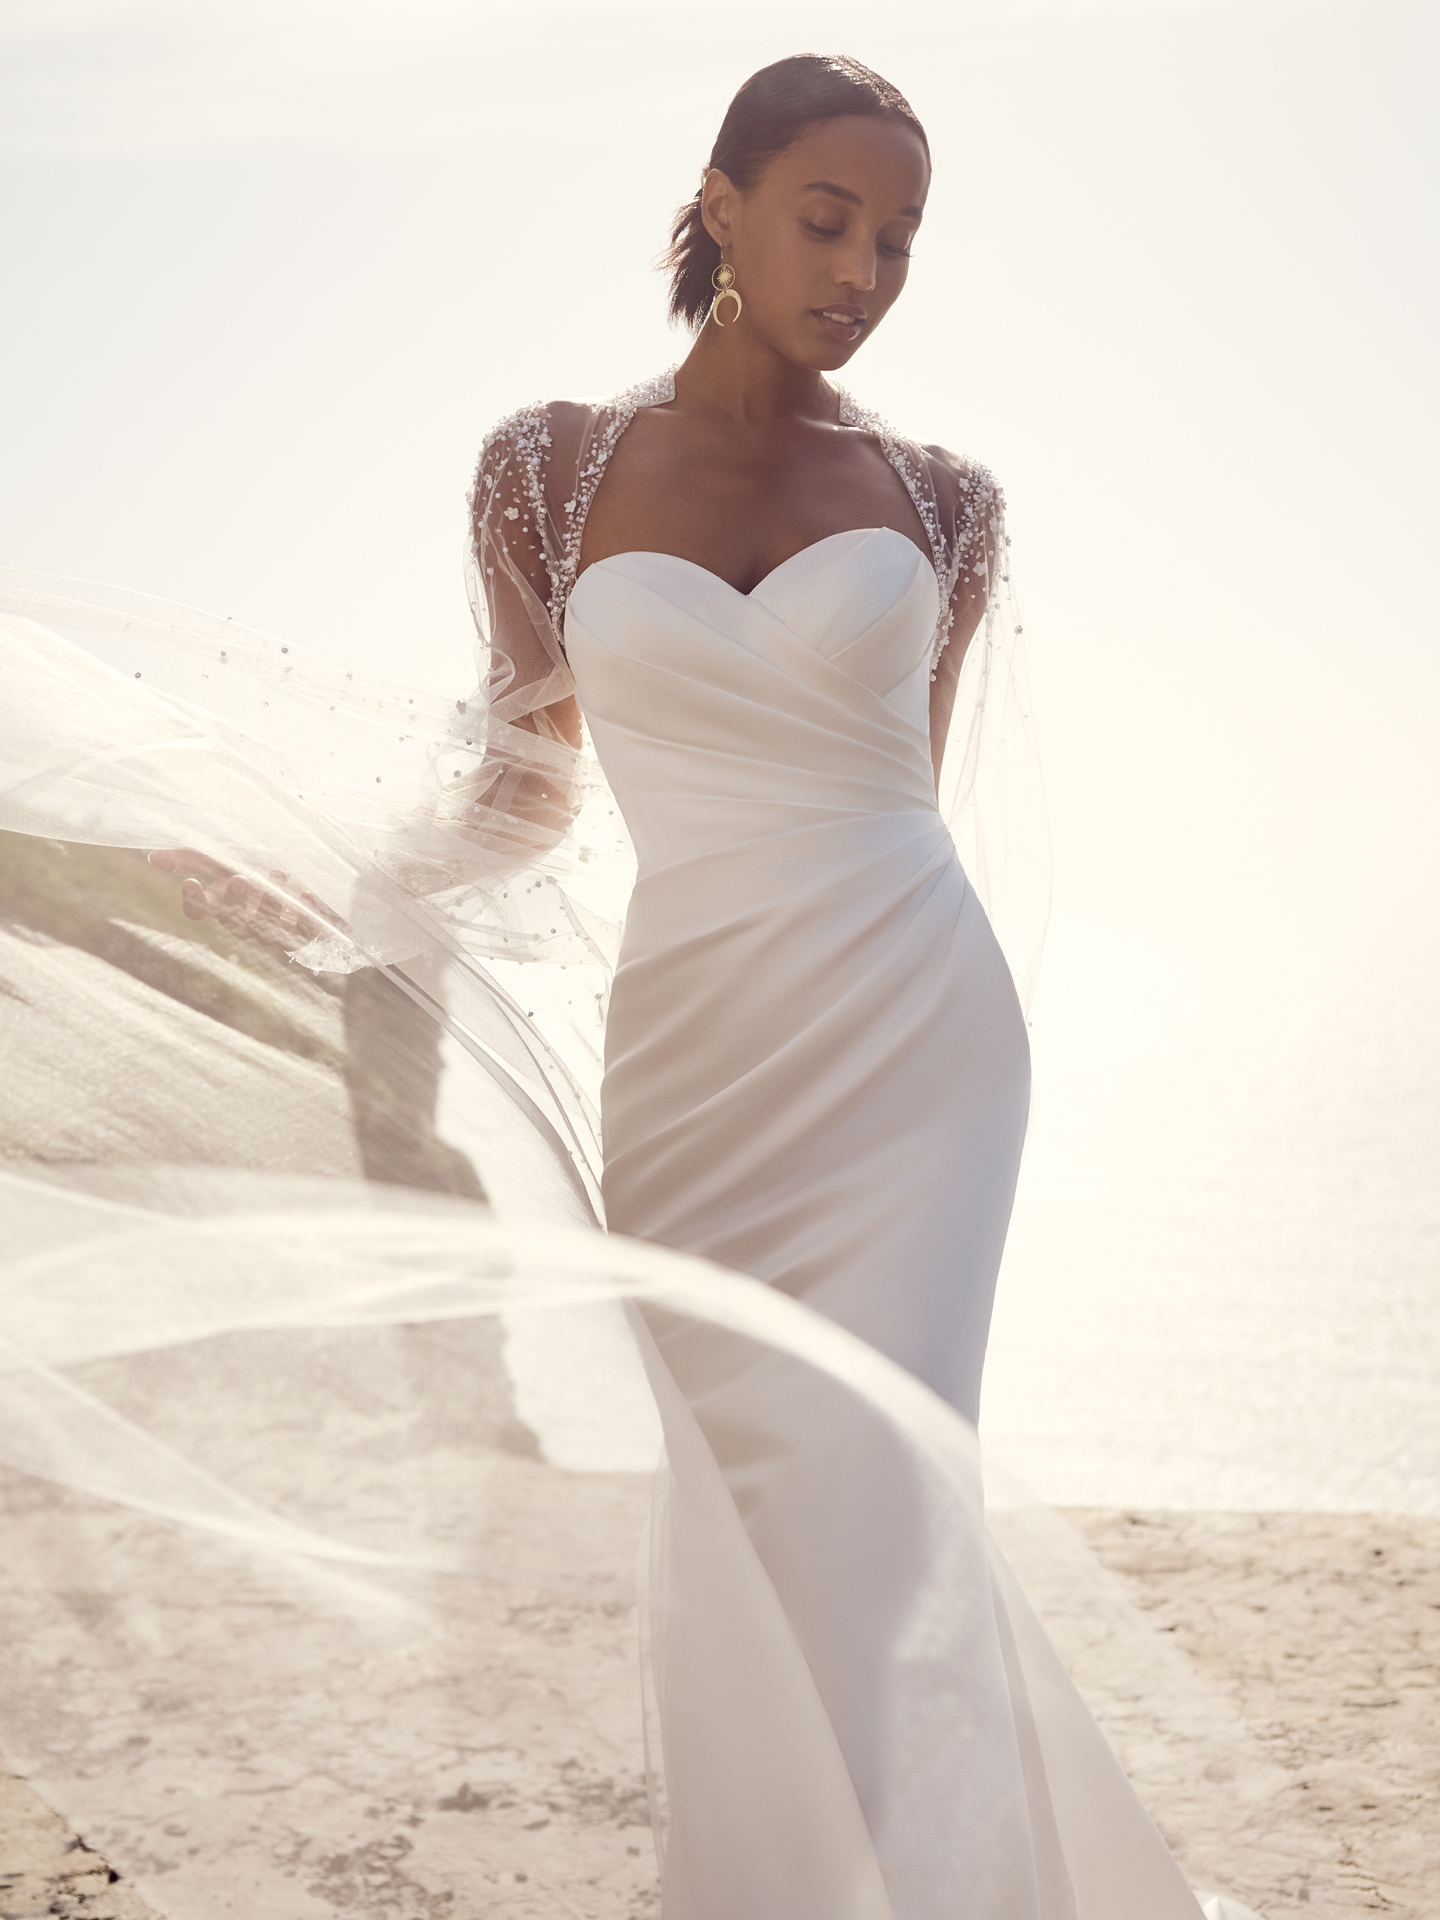 Bride In Strapless Wedding Dress With Crystal Wedding Jacket Called Clover By Rebecca Ingram